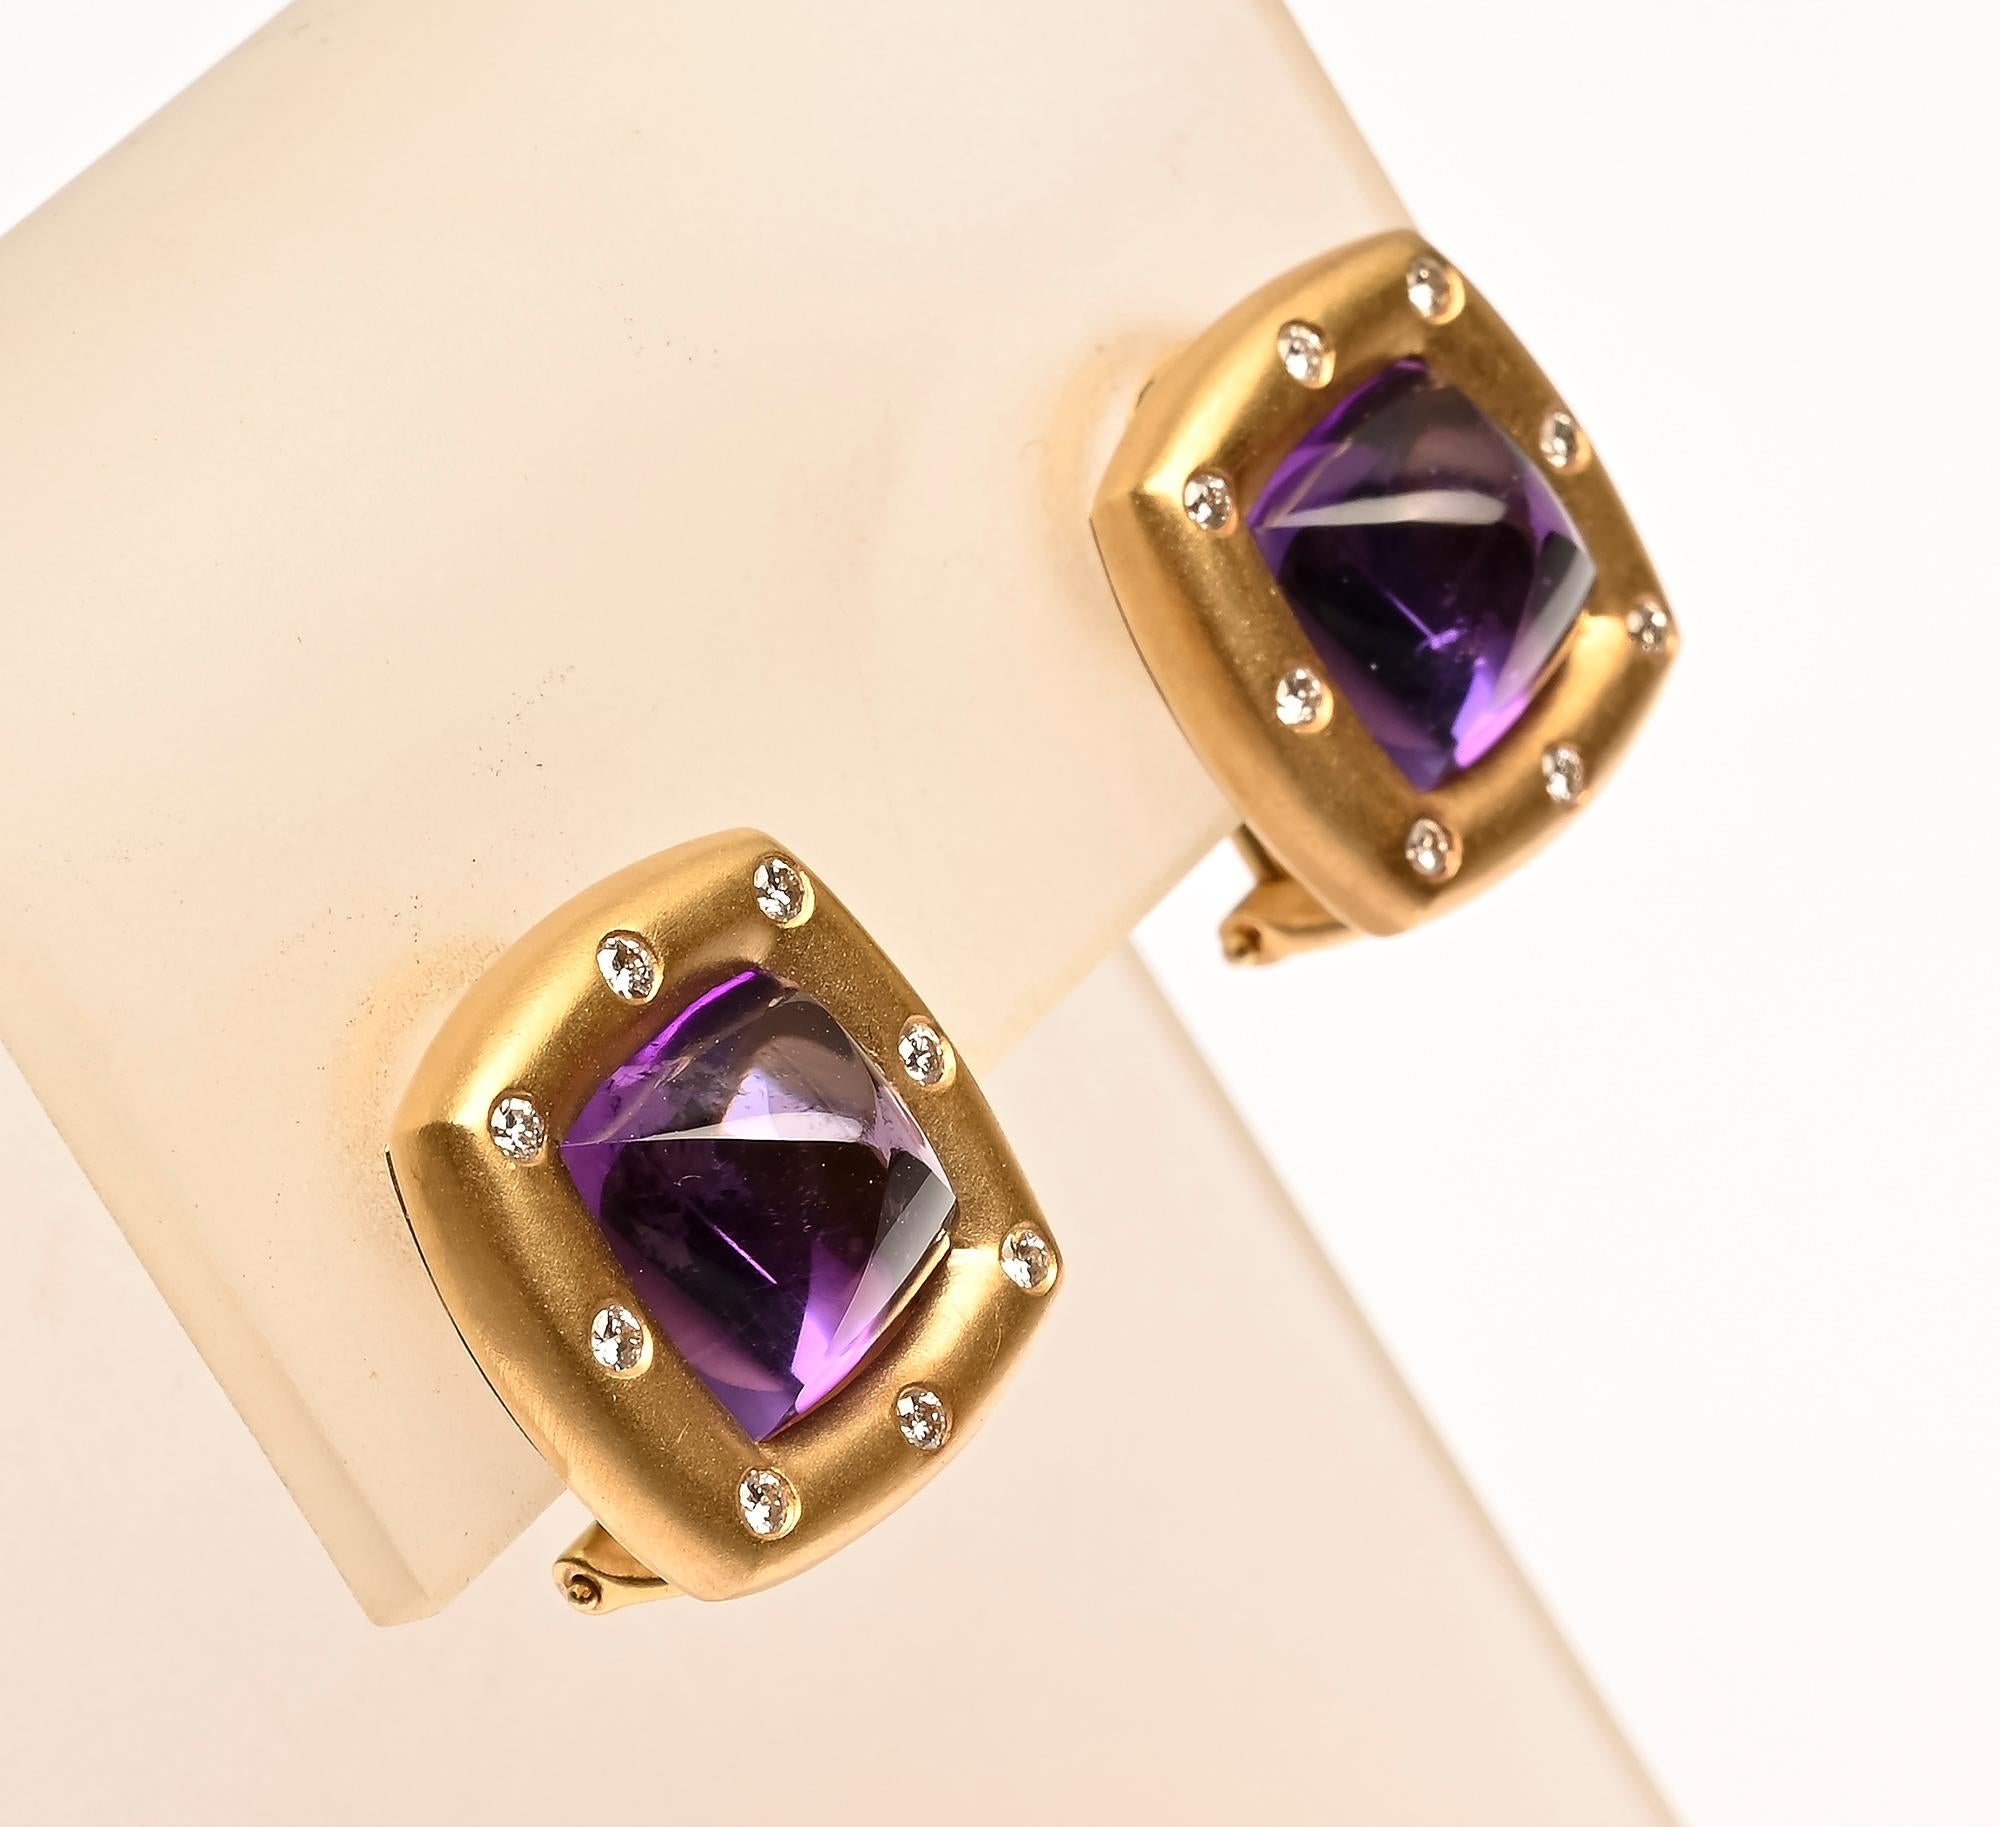 Tailored amethyst earrings by H. Stern with a hint of sparkle. Eight small diamonds surround the sugarloaf cut amethyst center.
Backs are clips and posts.